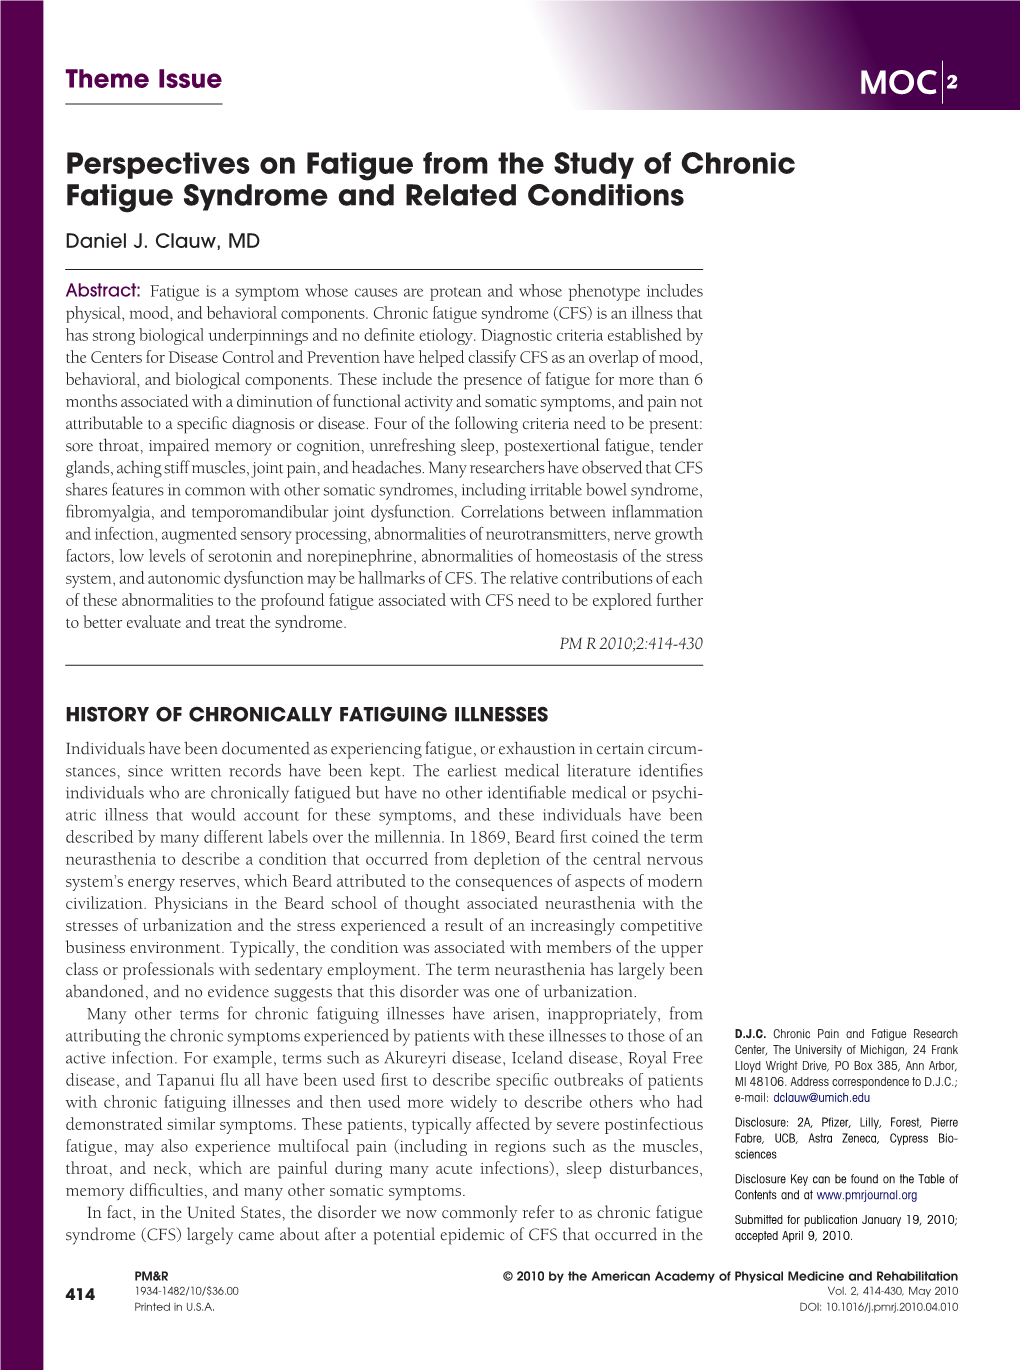 Perspectives on Fatigue from the Study of Chronic Fatigue Syndrome and Related Conditions